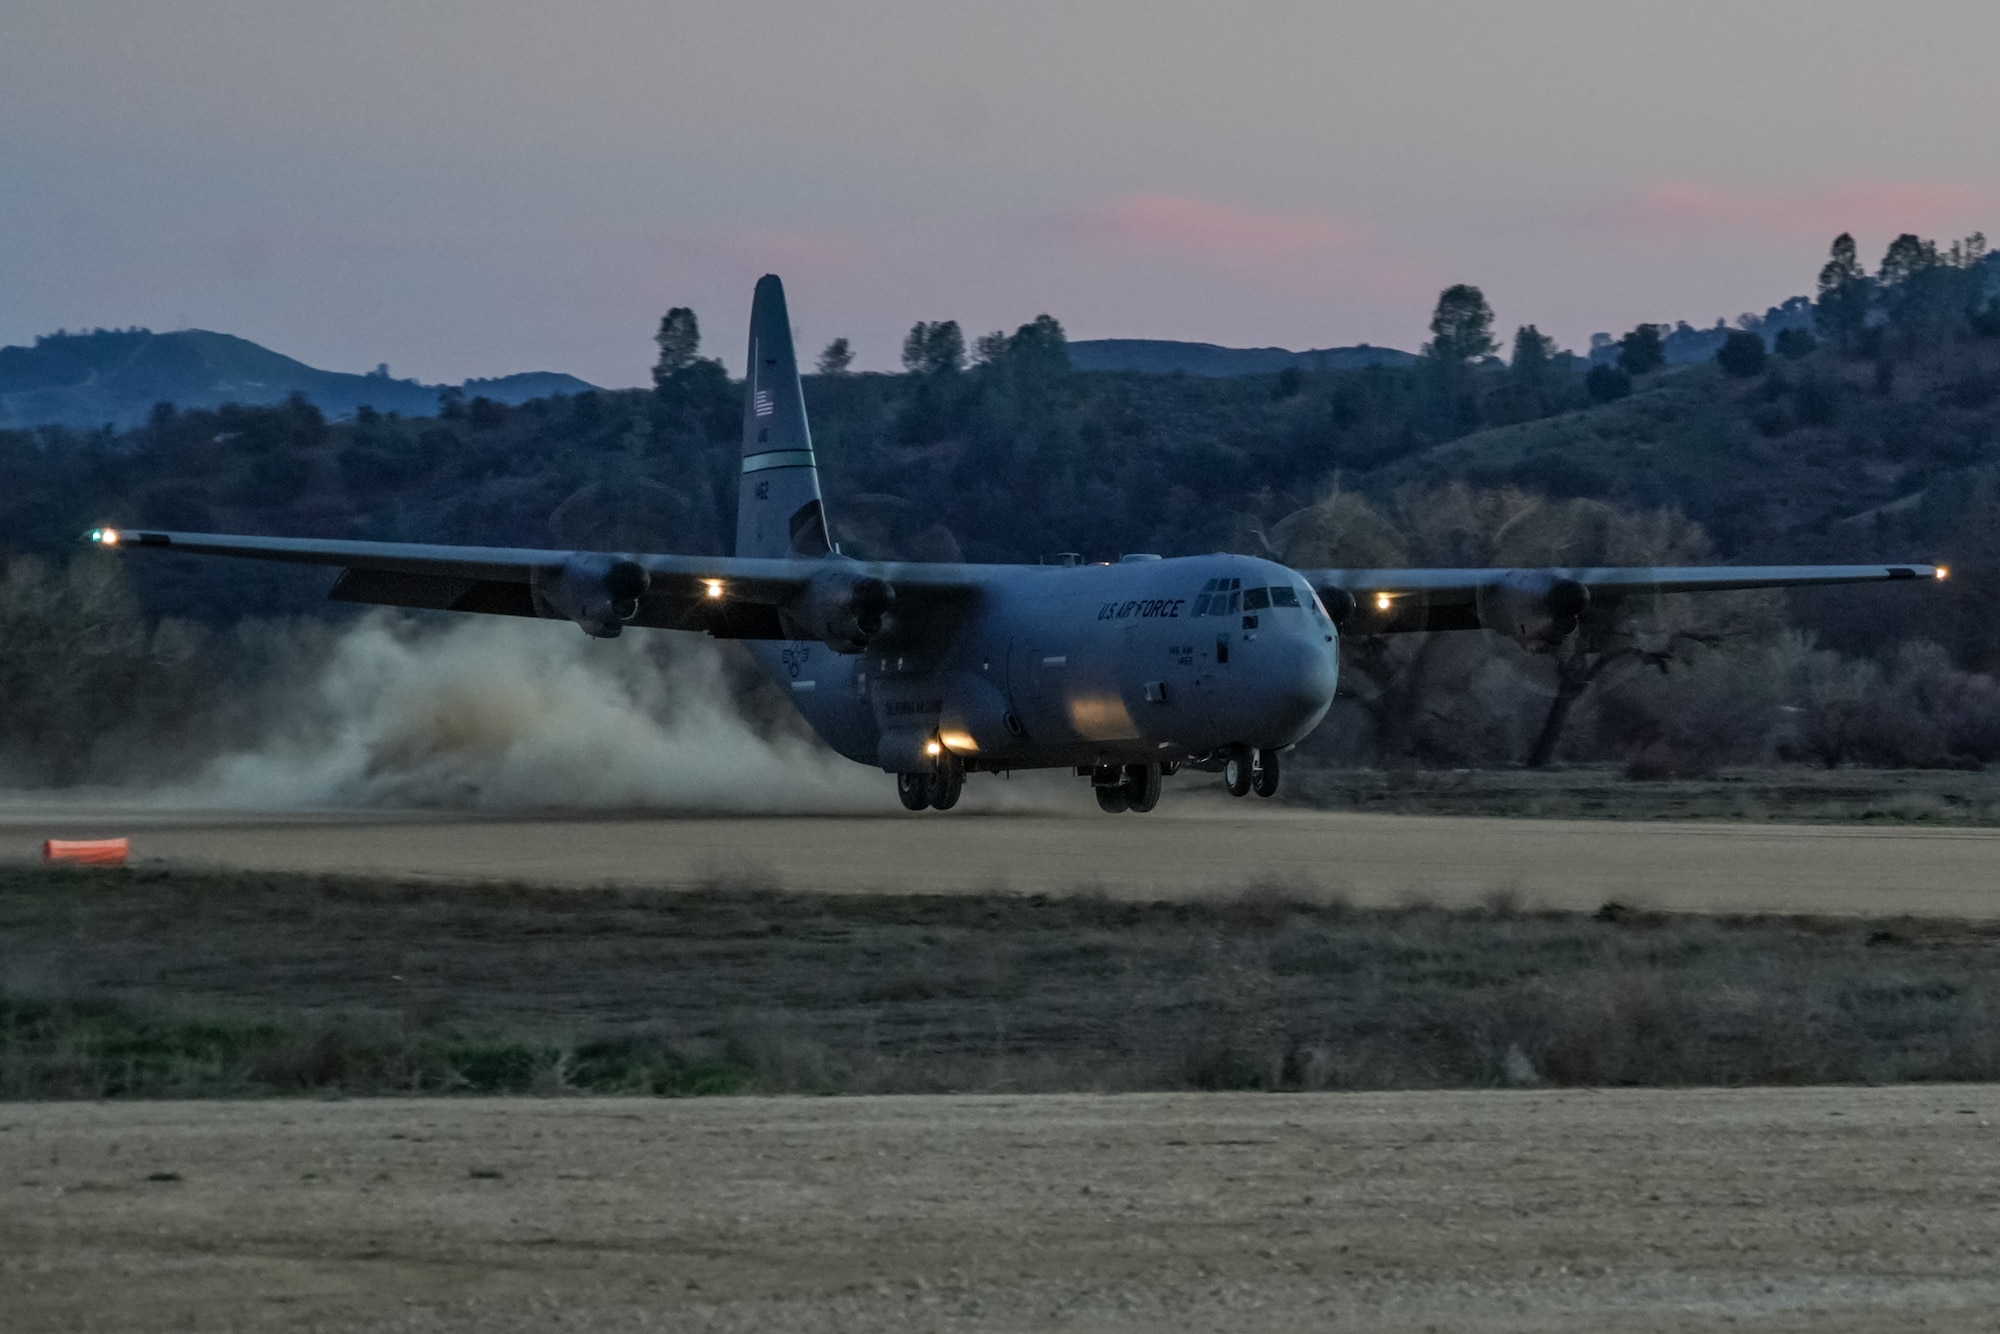 U.S. Air Force personnel assigned to the 621st Contingency Response Wing (621 CRW) load equipment into the back of a C-130J aircraft assigned to the 115th Airlift Squadron on an improvised dirt runway at Fort Hunter Liggett, California, February 8, 2022. Utilizing the C-130J and other Department of Defense aircraft, the 146th Contingency Response Flight and the 621 CRW partnered to accomplish skill-enhancing training and provide airlift support to the 621 CRW's evaluated exercise. (U.S. Air National Guard photo by Staff Sgt. Michelle Ulber)